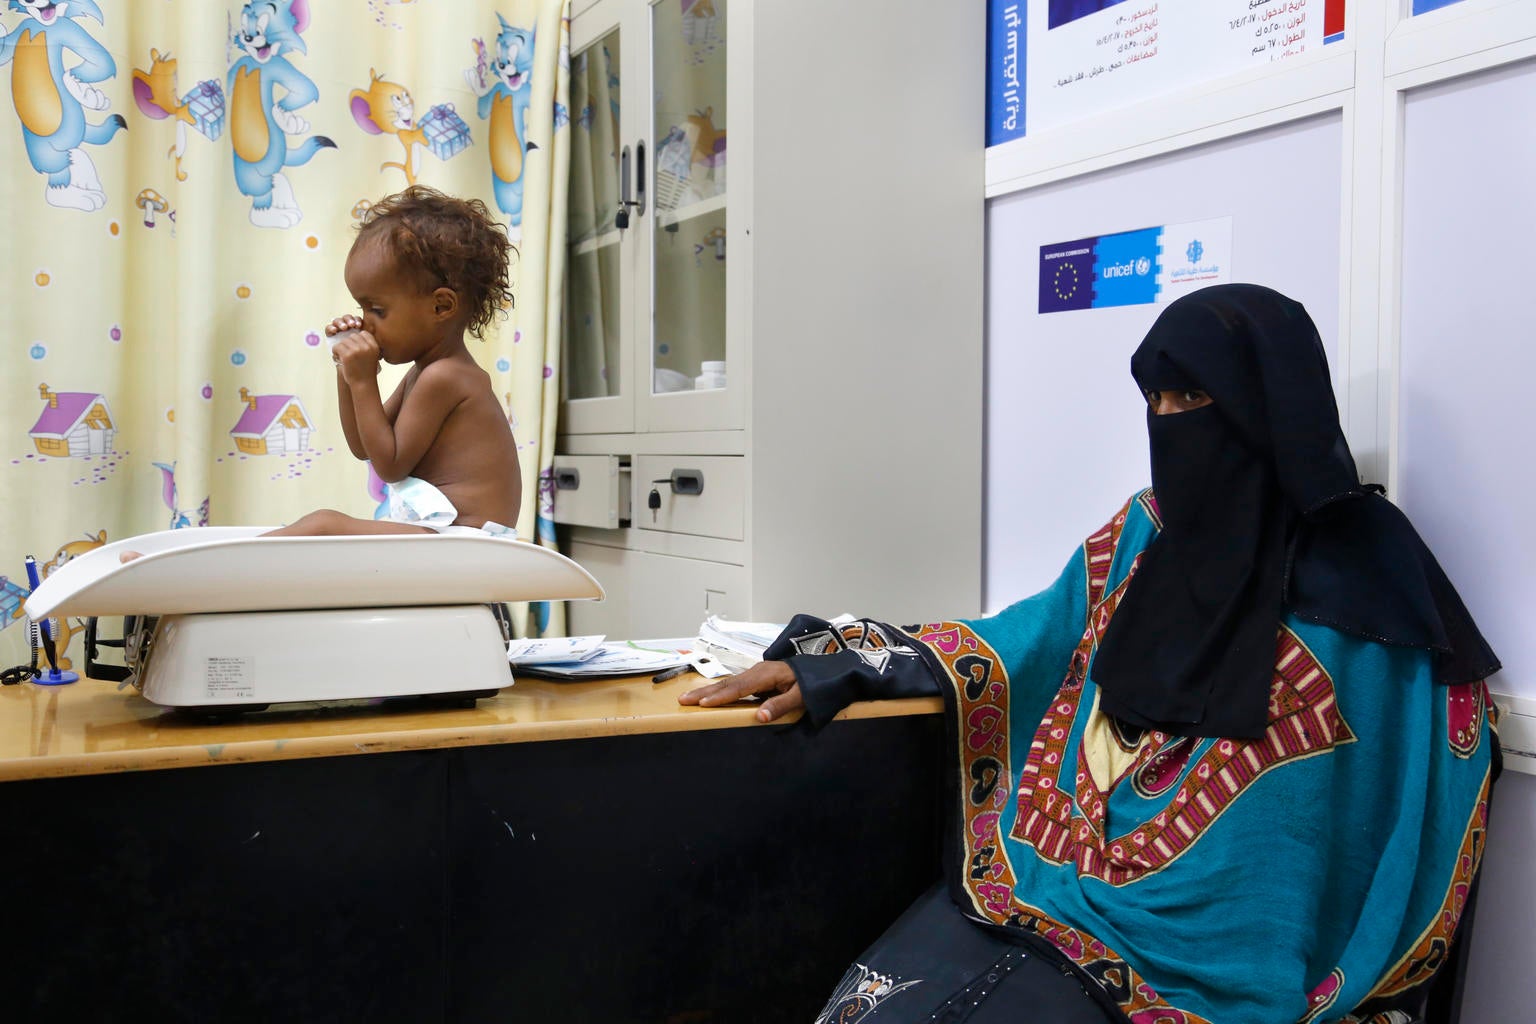 Millions of children across Yemen face serious threats due to malnutrition, in particular, and the lack of basic health services, in general.